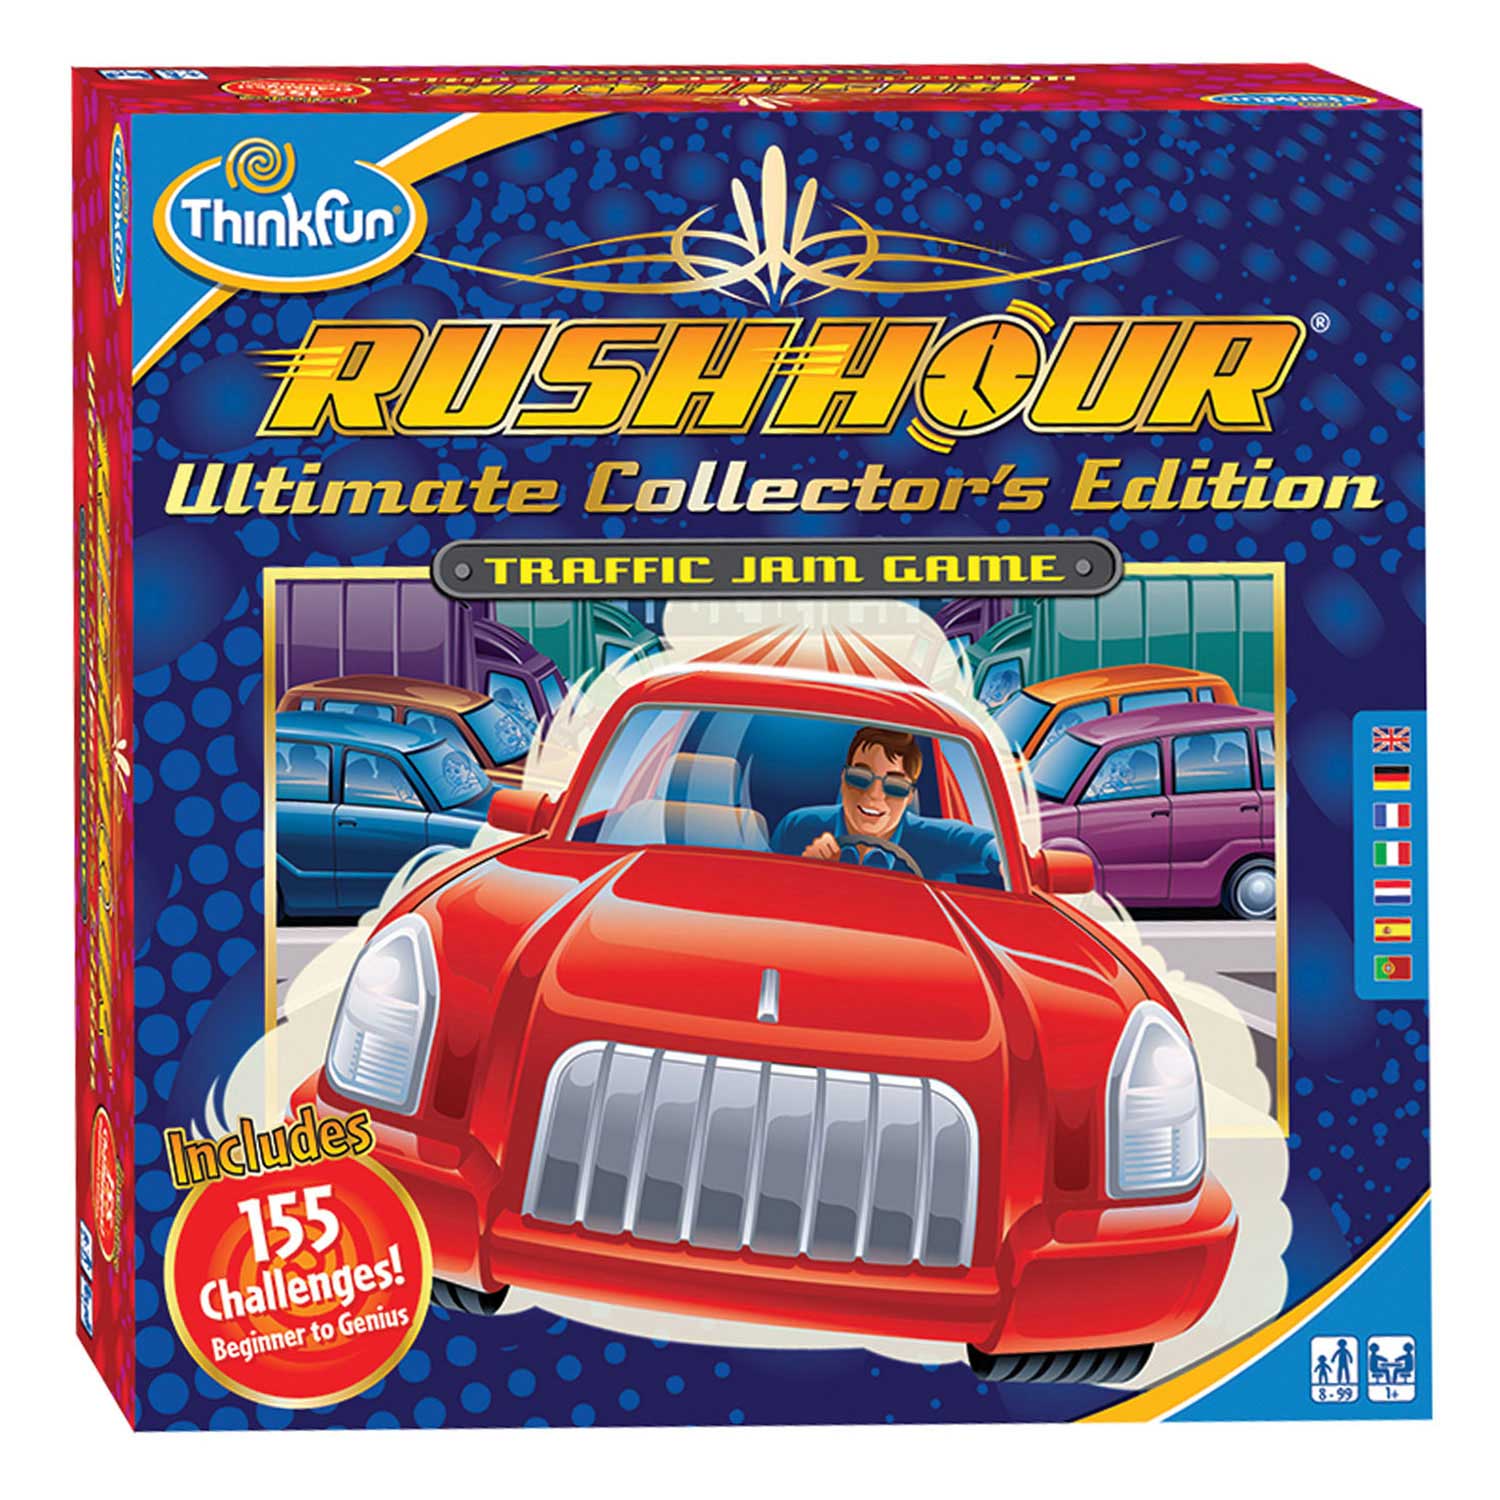 NEW GAME: Rush Hour Ultimate  🚨 NEW GAME! 🚨 It's time to take your  classic Rush Hour favorite to the next level: Rush Hour Ultimate is now  available in a limited